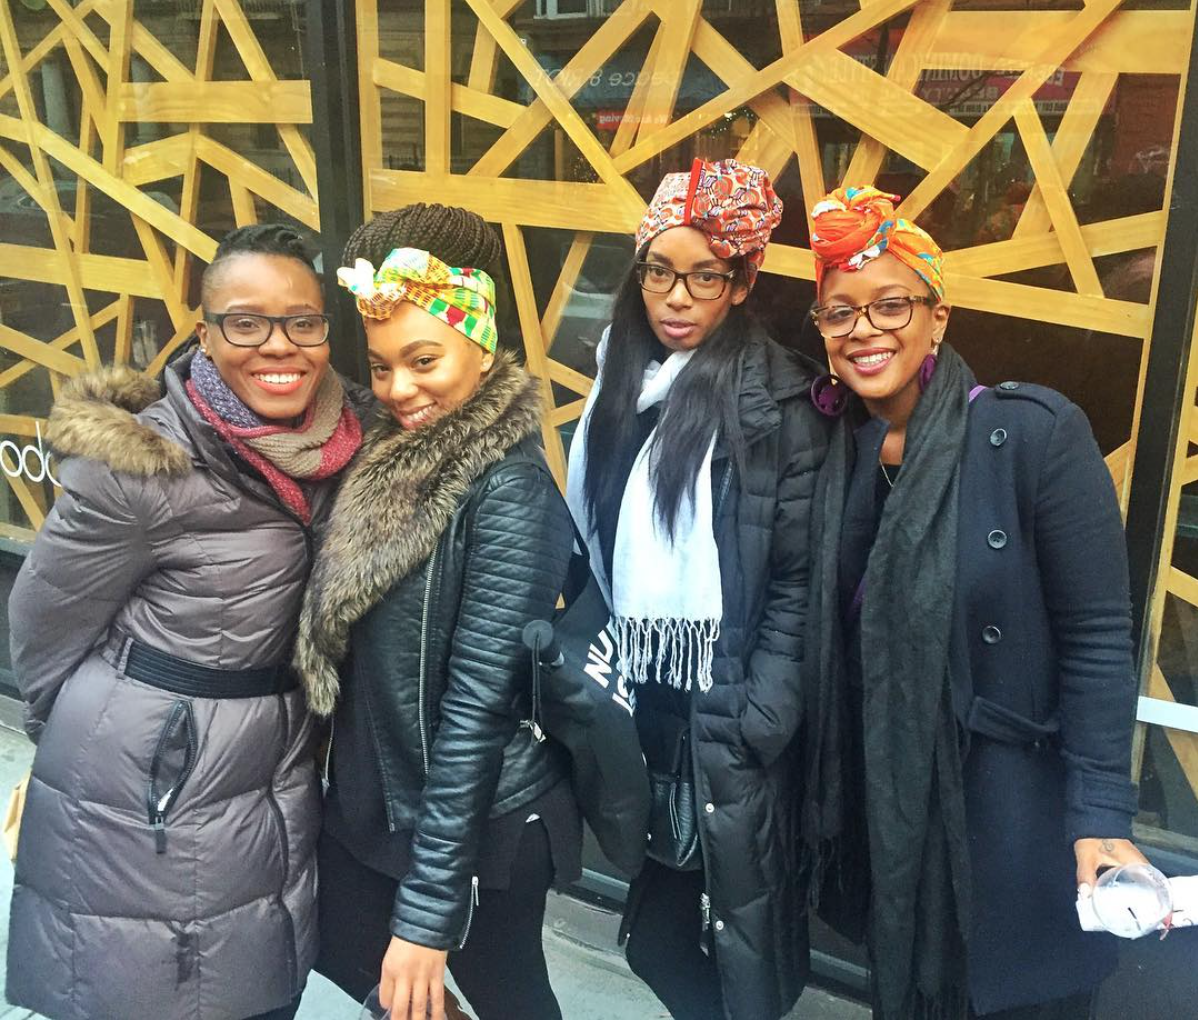 16 Instagram Photos That Show #KwanzaaCrawl Was The Most Beautiful Black Event in Brooklyn